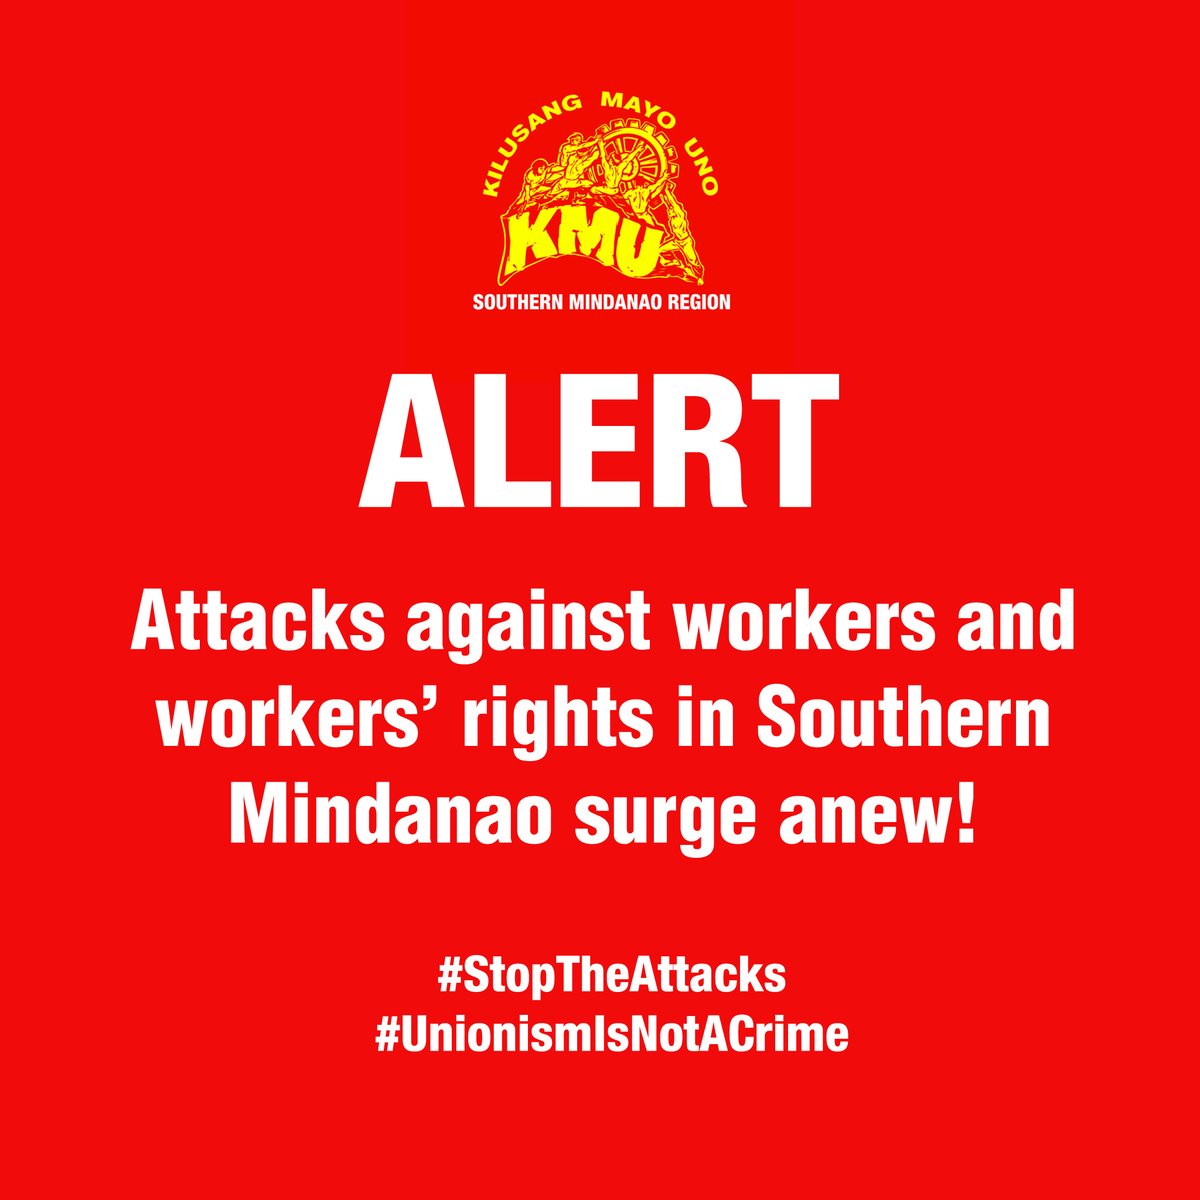 ALERT: This week, attacks against workers and workers' rights in Southern Mindanao surge anew! 🧵

#StopTheAttacks #UnionismIsNotACrime